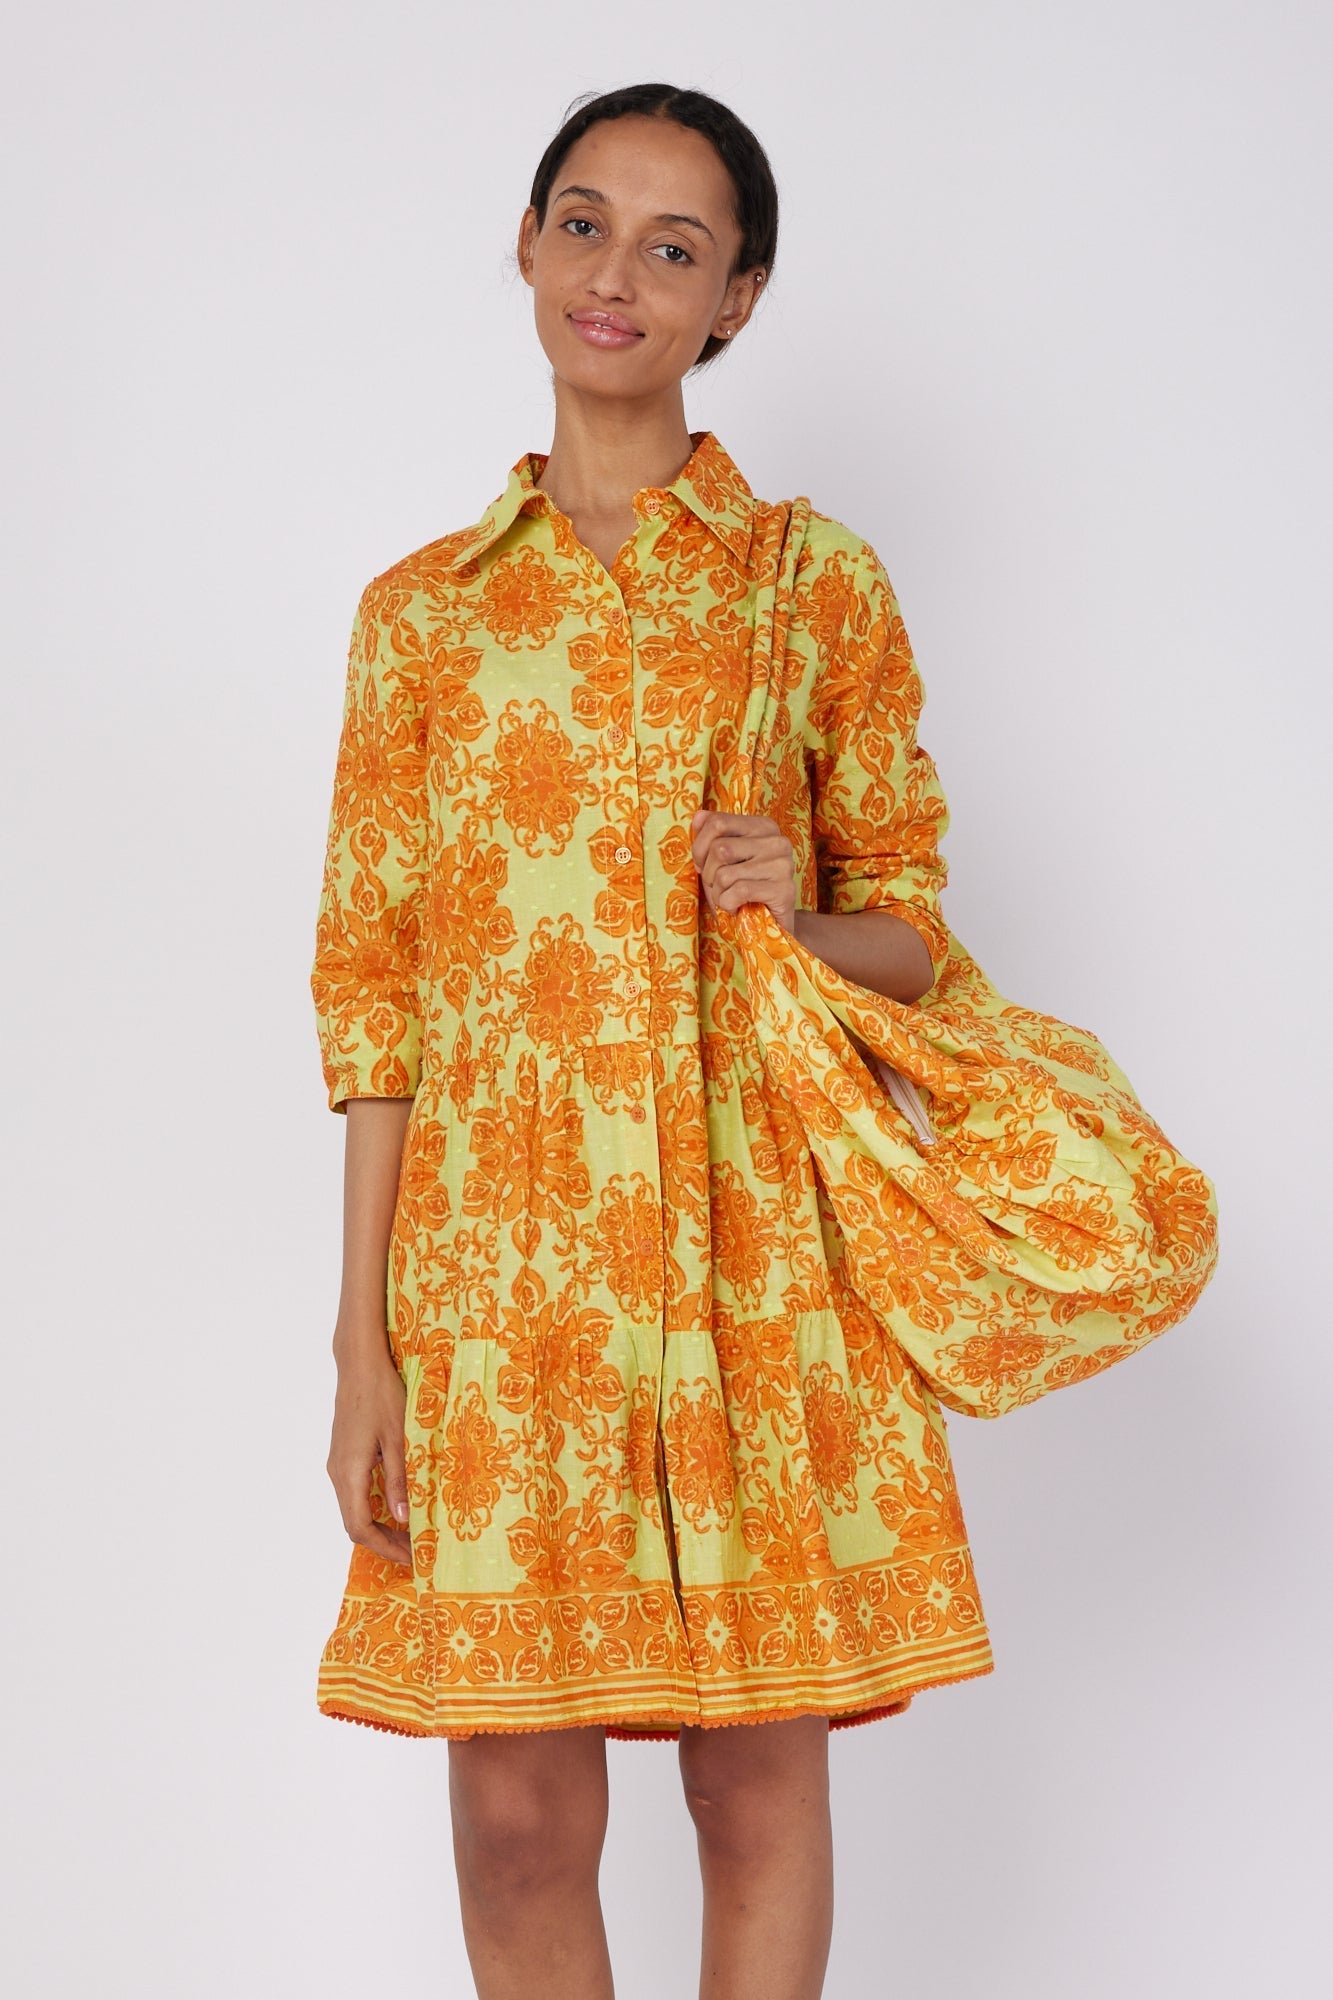 ModaPosa Alcee 3/4 Frill Sleeve Knee Length Dress with Relaxed Collar in Curacao Majolica . Discover women's resort dresses and lifestyle clothing inspired by the Mediterranean. Free worldwide shipping available!